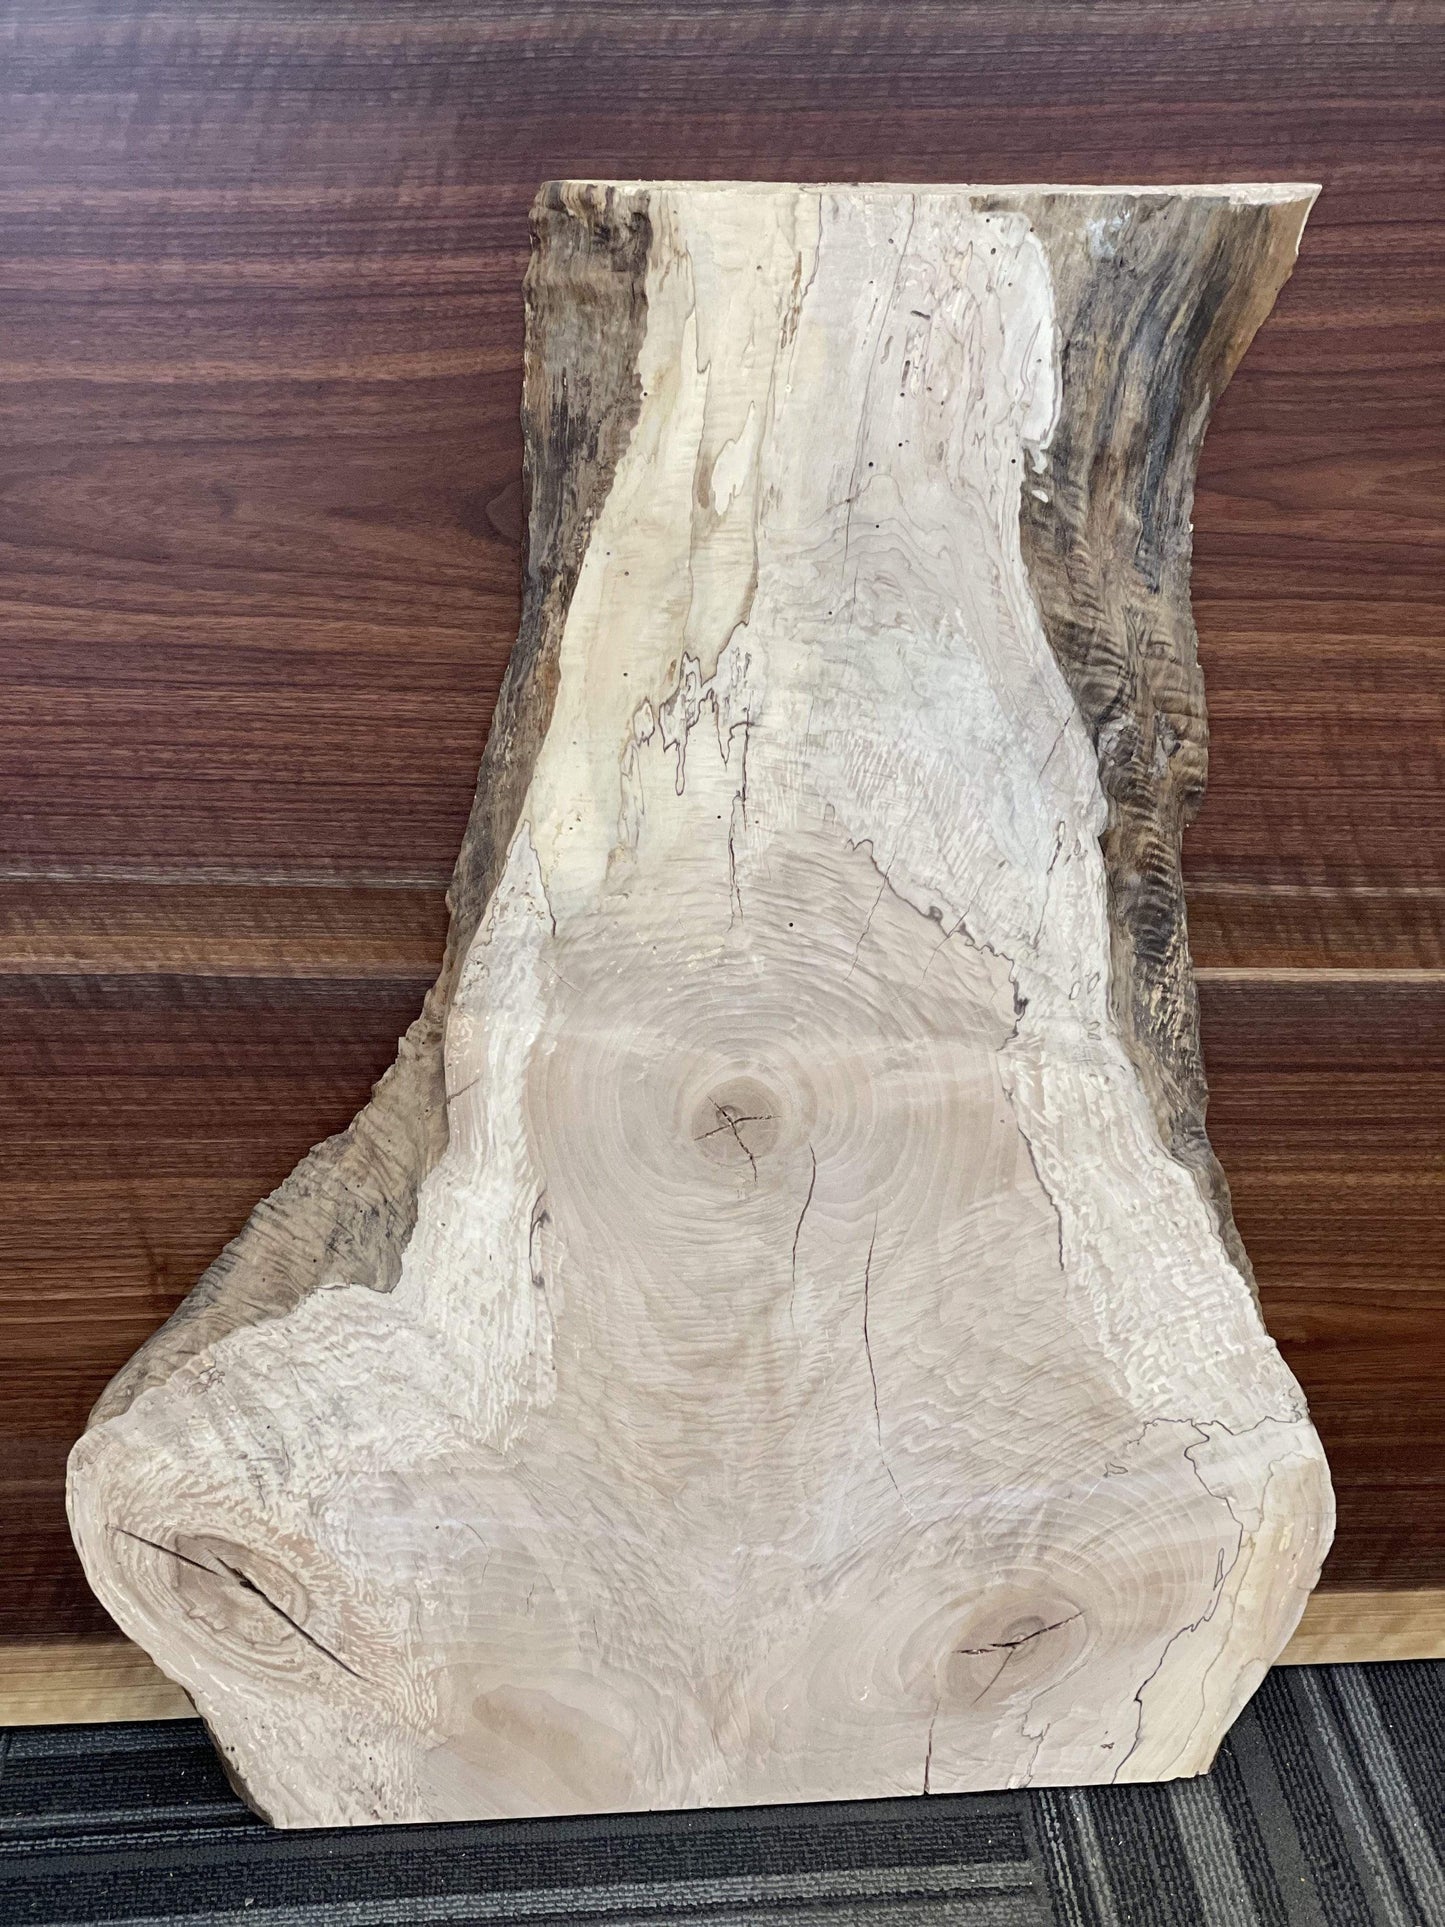 The Carpenty Shop Co., LLC Buy as is 36" Spalted Maple Slab